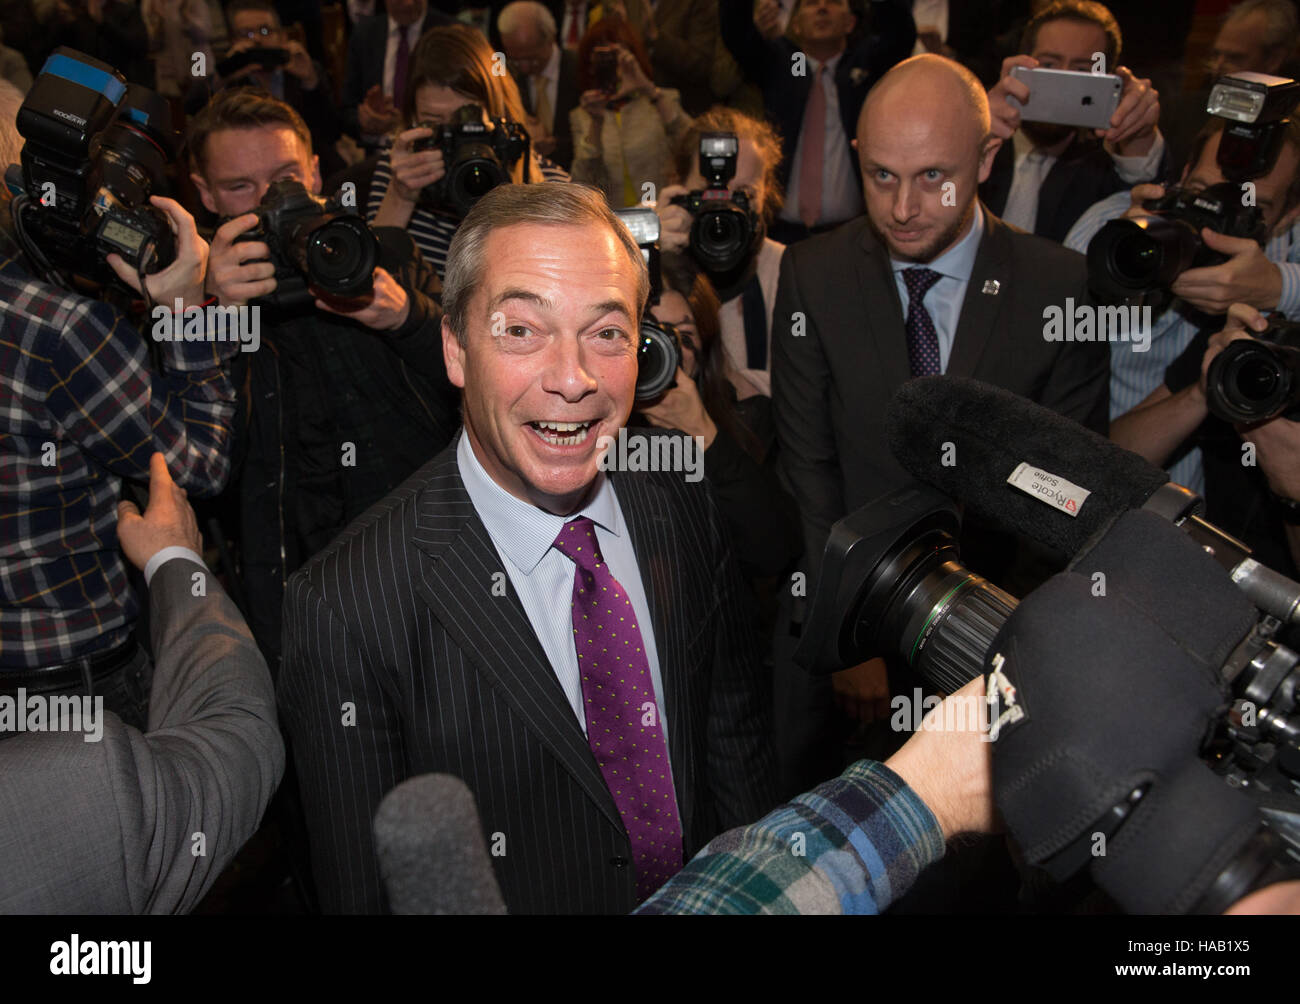 Former UKIP leader,Nigel Farage,arrives to make a speech ahead of the announcement of the new leader of UKIP,Paul Nuttall Stock Photo